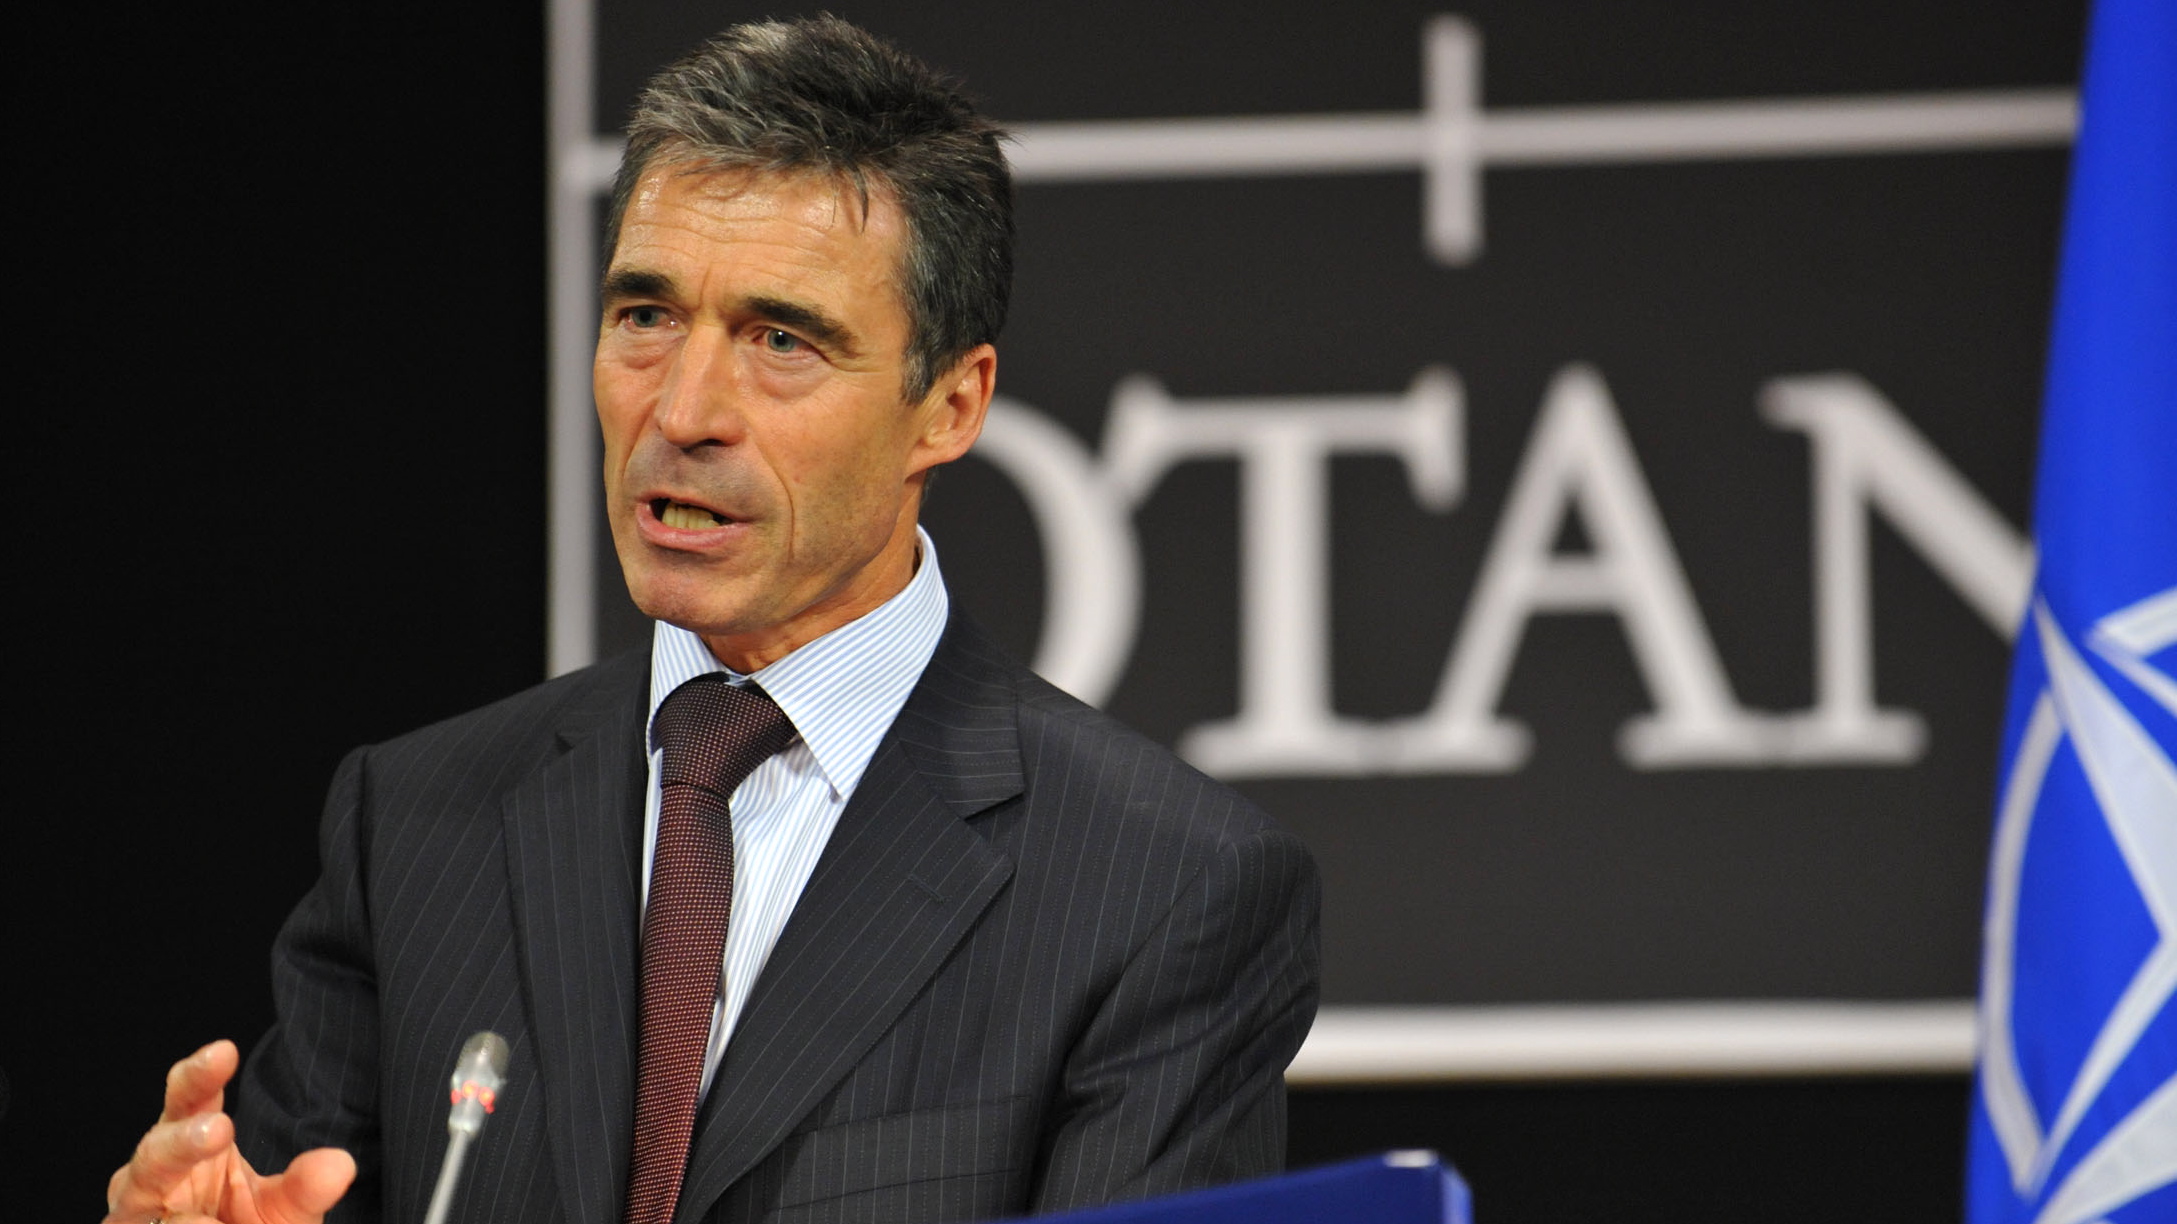 Rasmussen urges Russia to reconsider recognition of Abkhazia and South Ossetia